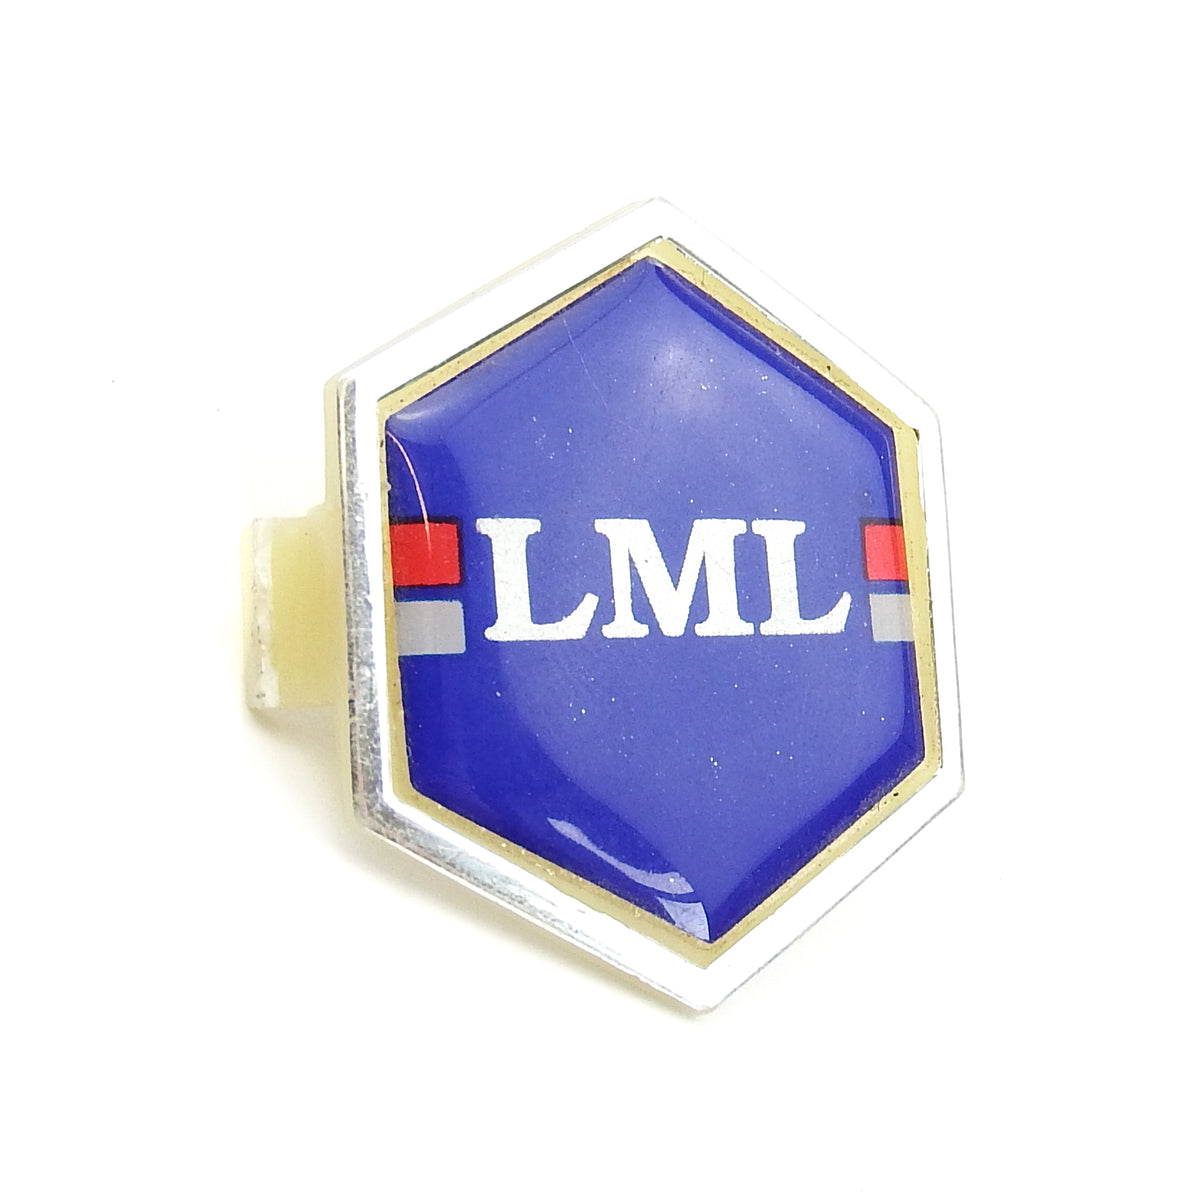 Vespa LML Hexagon Shaped Clip In Horncover Badge Blue